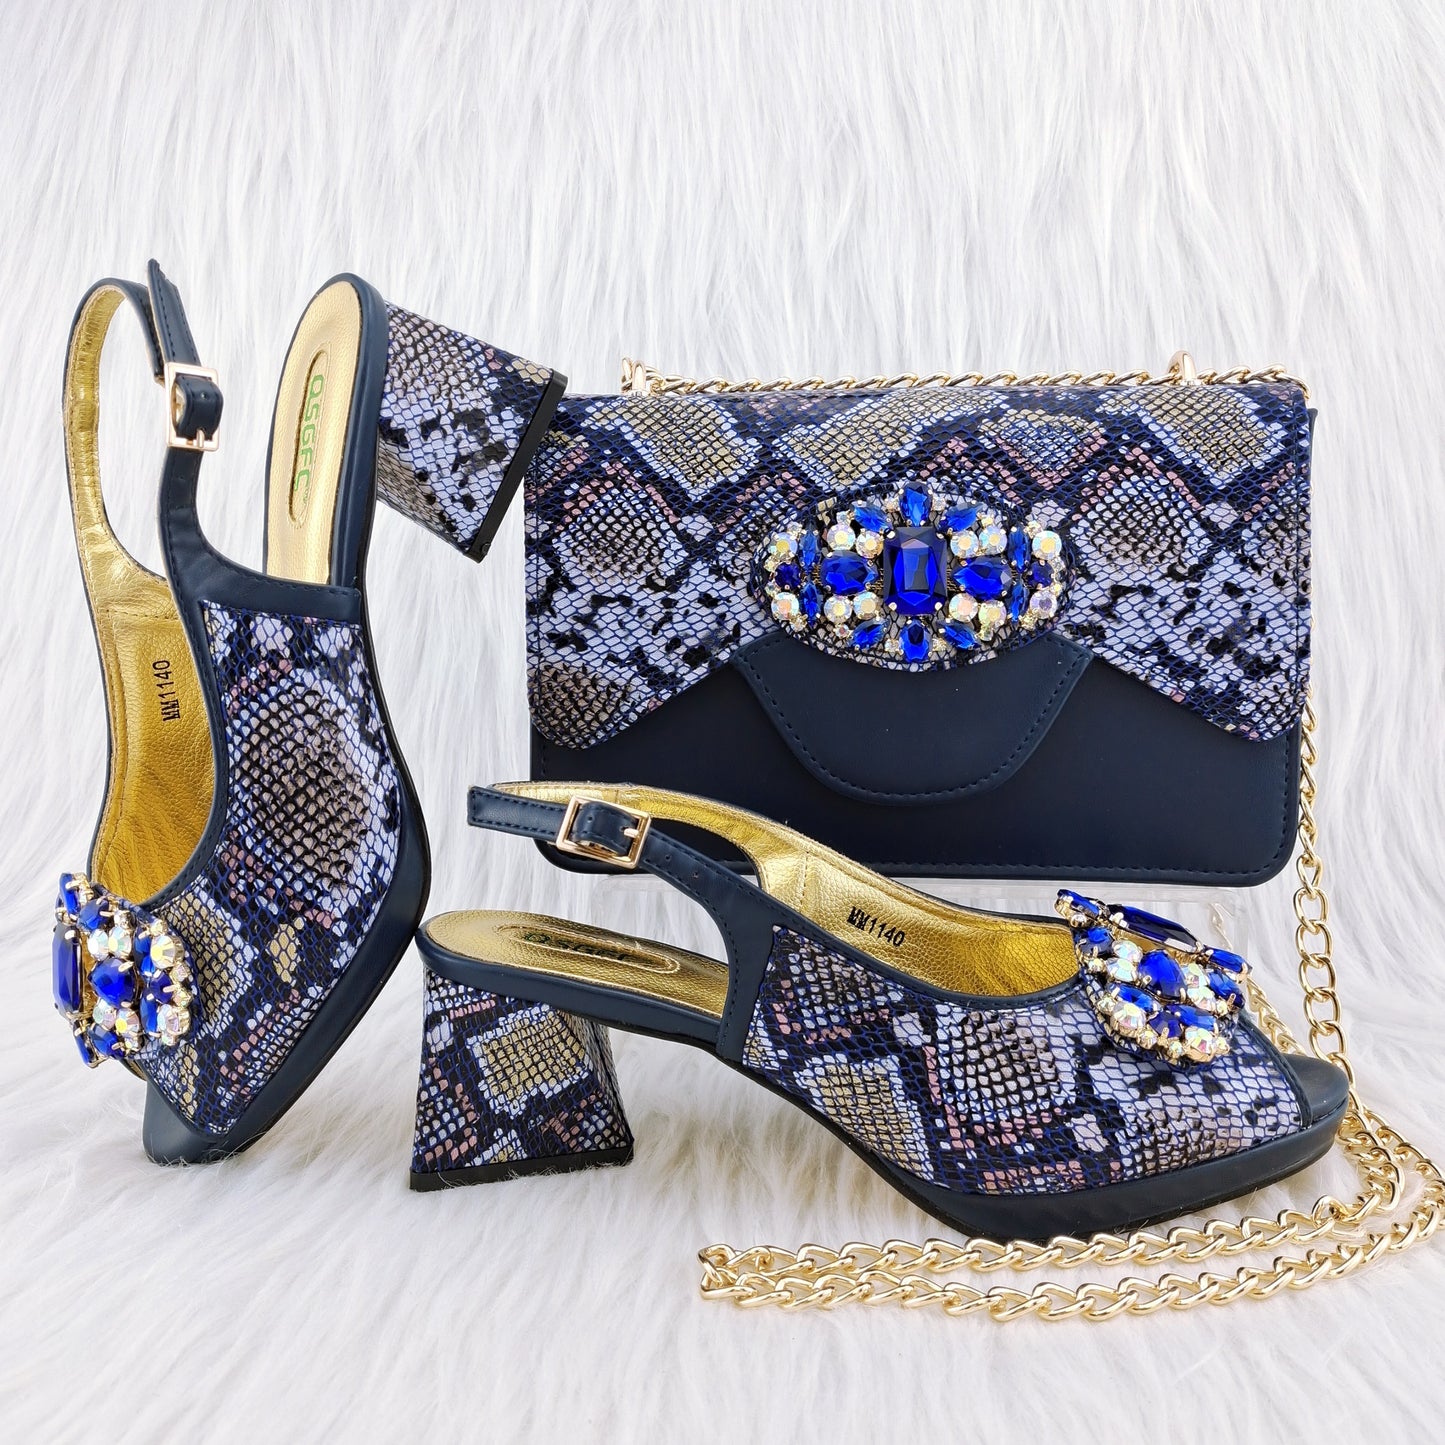 Shoes And Bag Matching Set With gold Women Italian Shoes